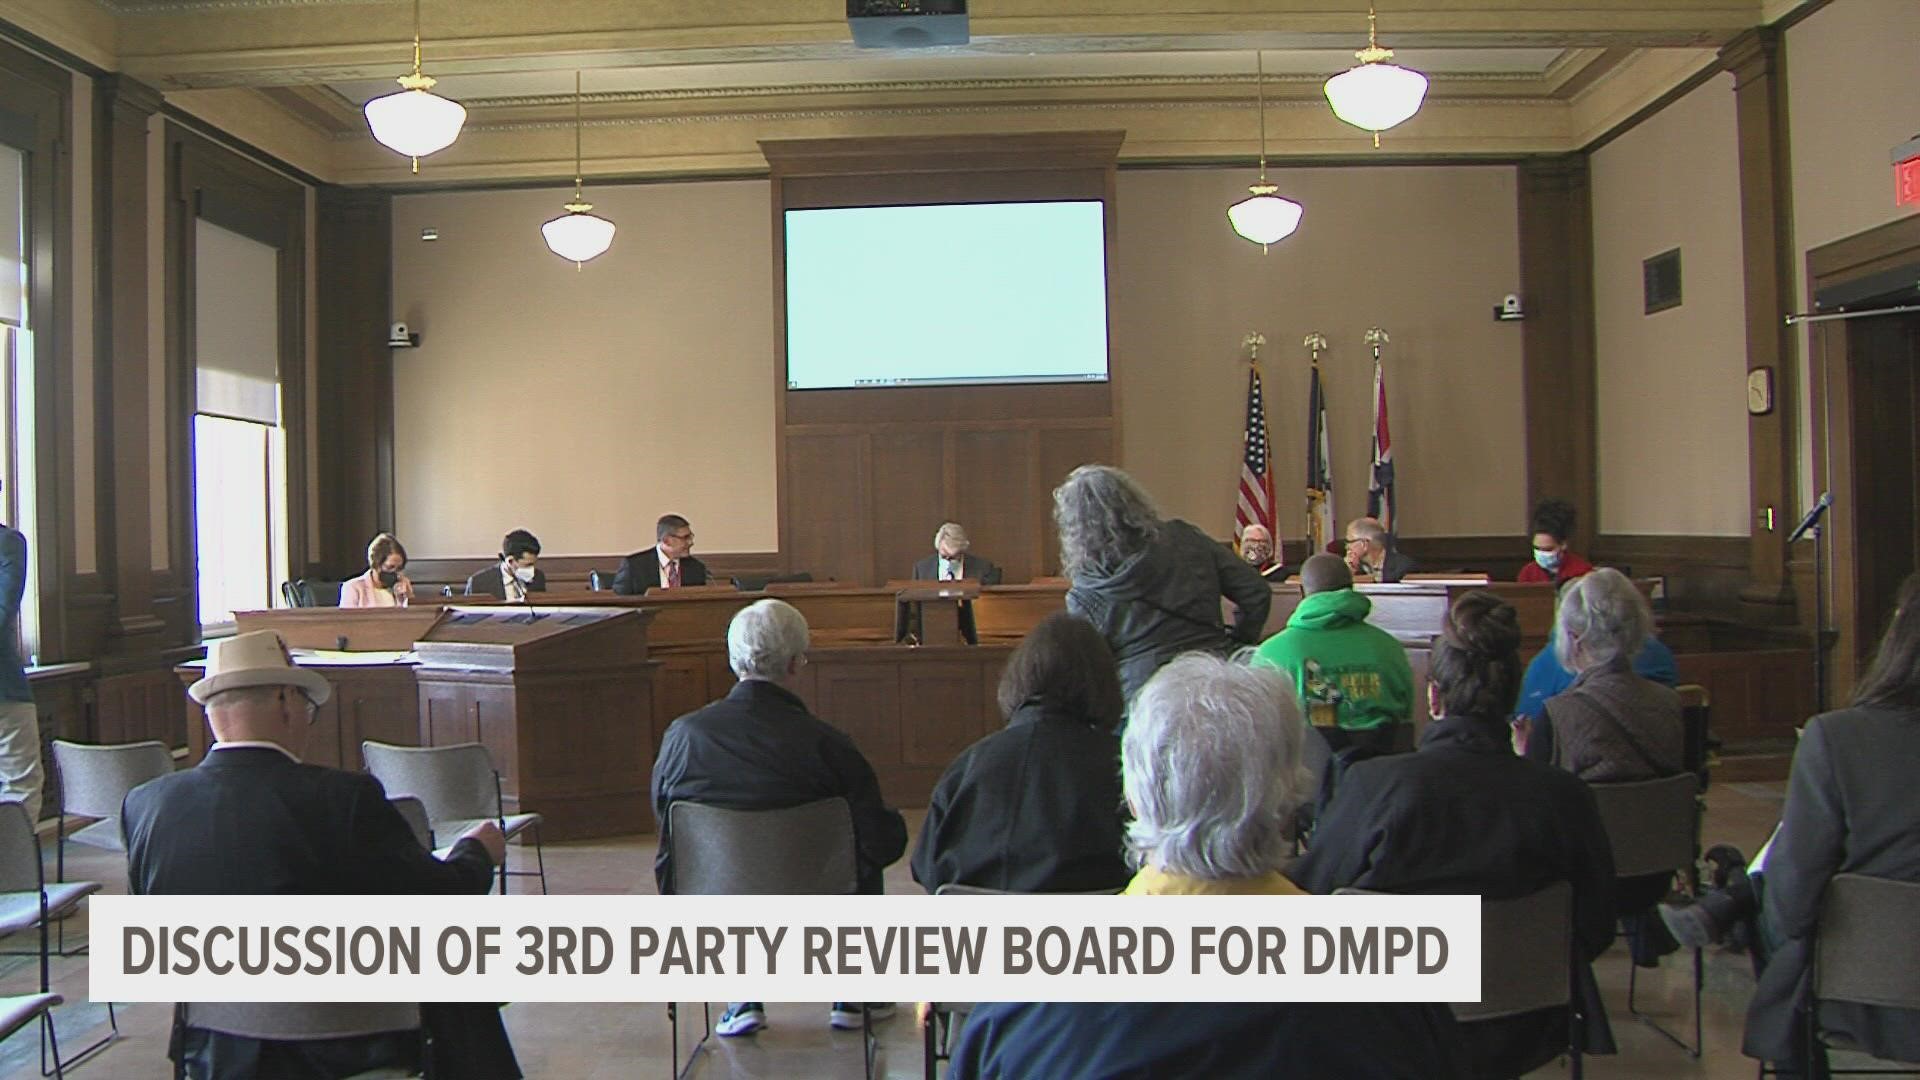 After Iowa Citizens for Community Improvement shared a video of what they say is DMPD using excessive force, Des Moines City Council set up a review meeting.